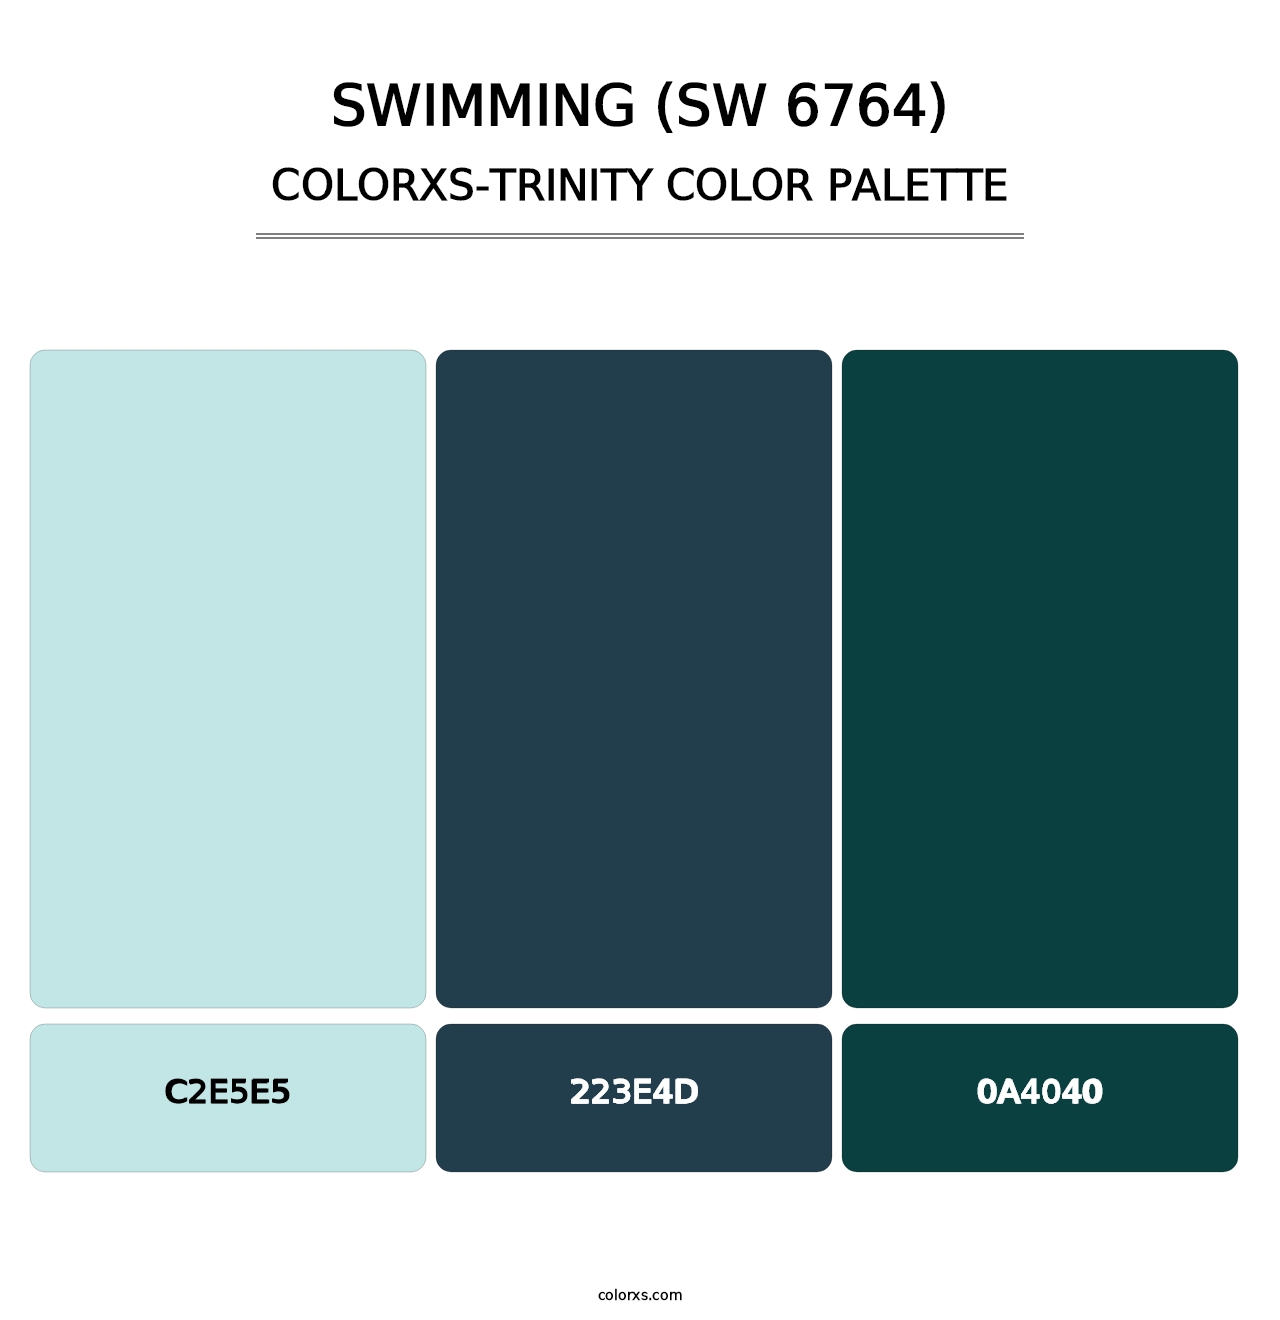 Swimming (SW 6764) - Colorxs Trinity Palette